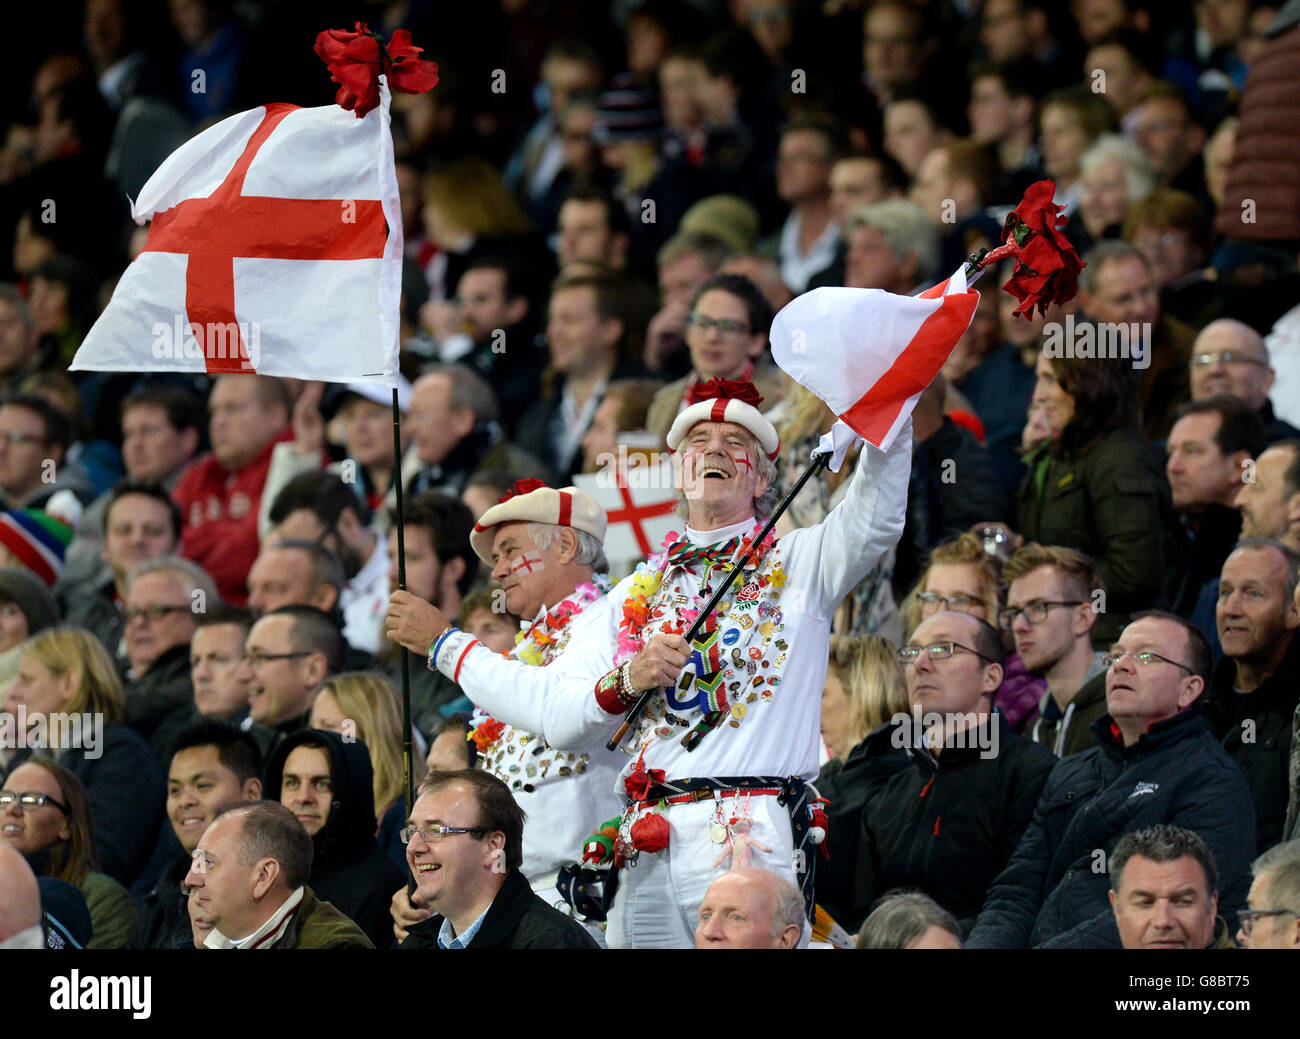 Rugby Union - Rugby World Cup 2015 - Pool A - England v Uruguay - City of Manchester Stadium. England fans wave flags in the stands during the Rugby World Cup match at the City of Manchester Stadium. Stock Photo